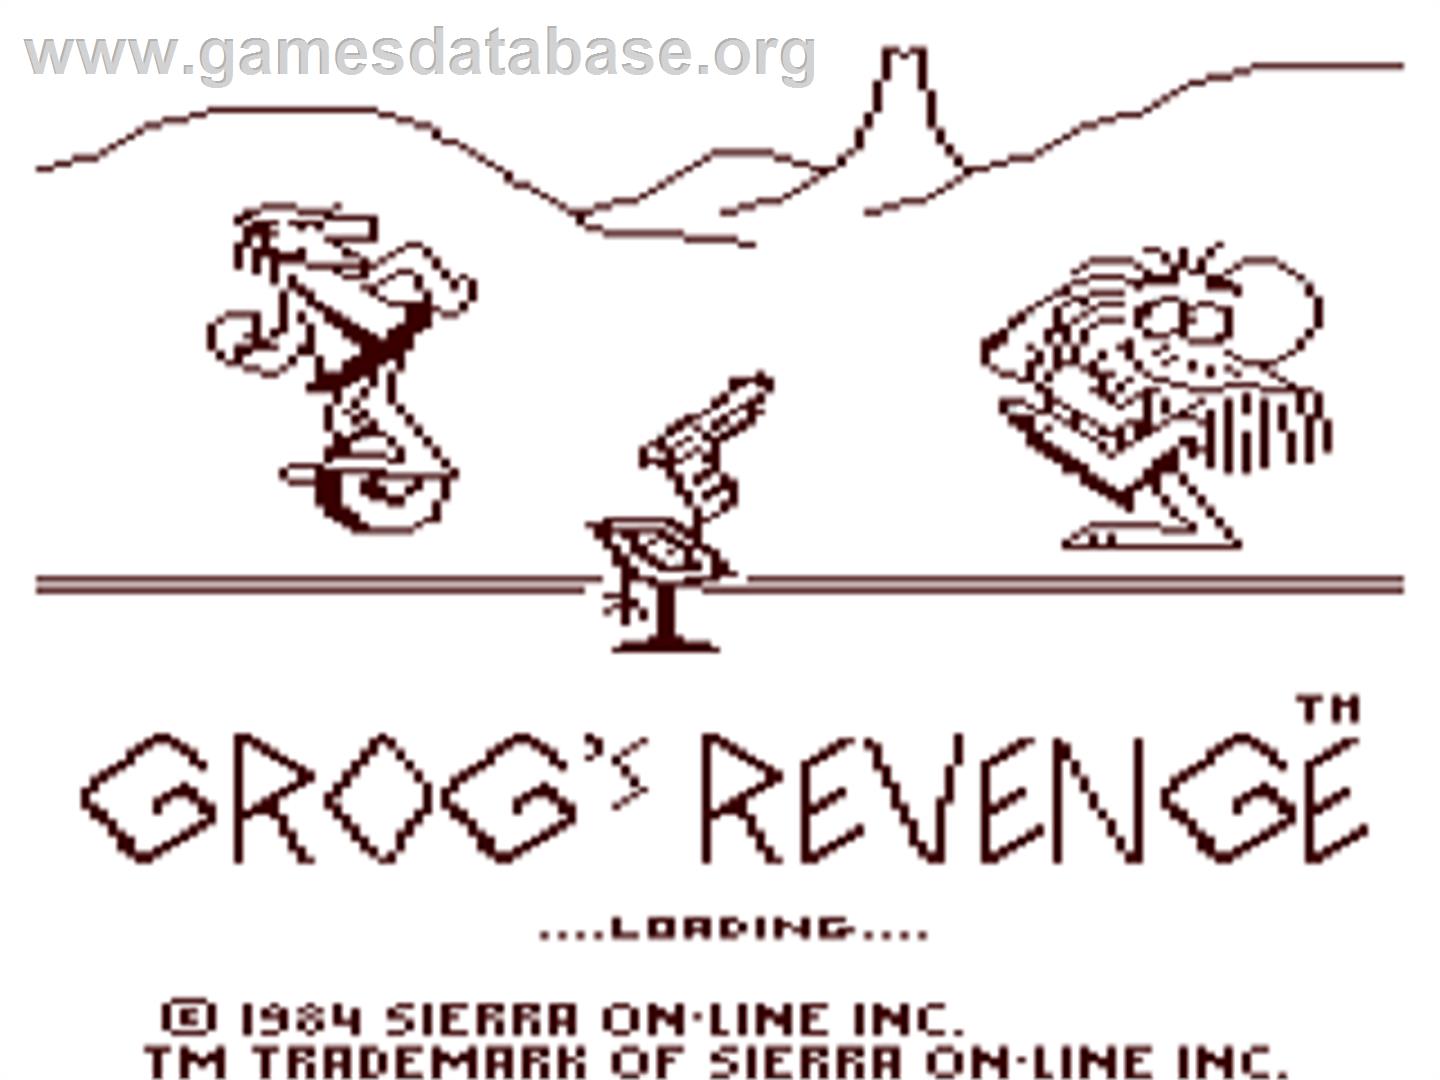 BC's Quest for Tires II: Grog's Revenge - Commodore 64 - Artwork - Title Screen